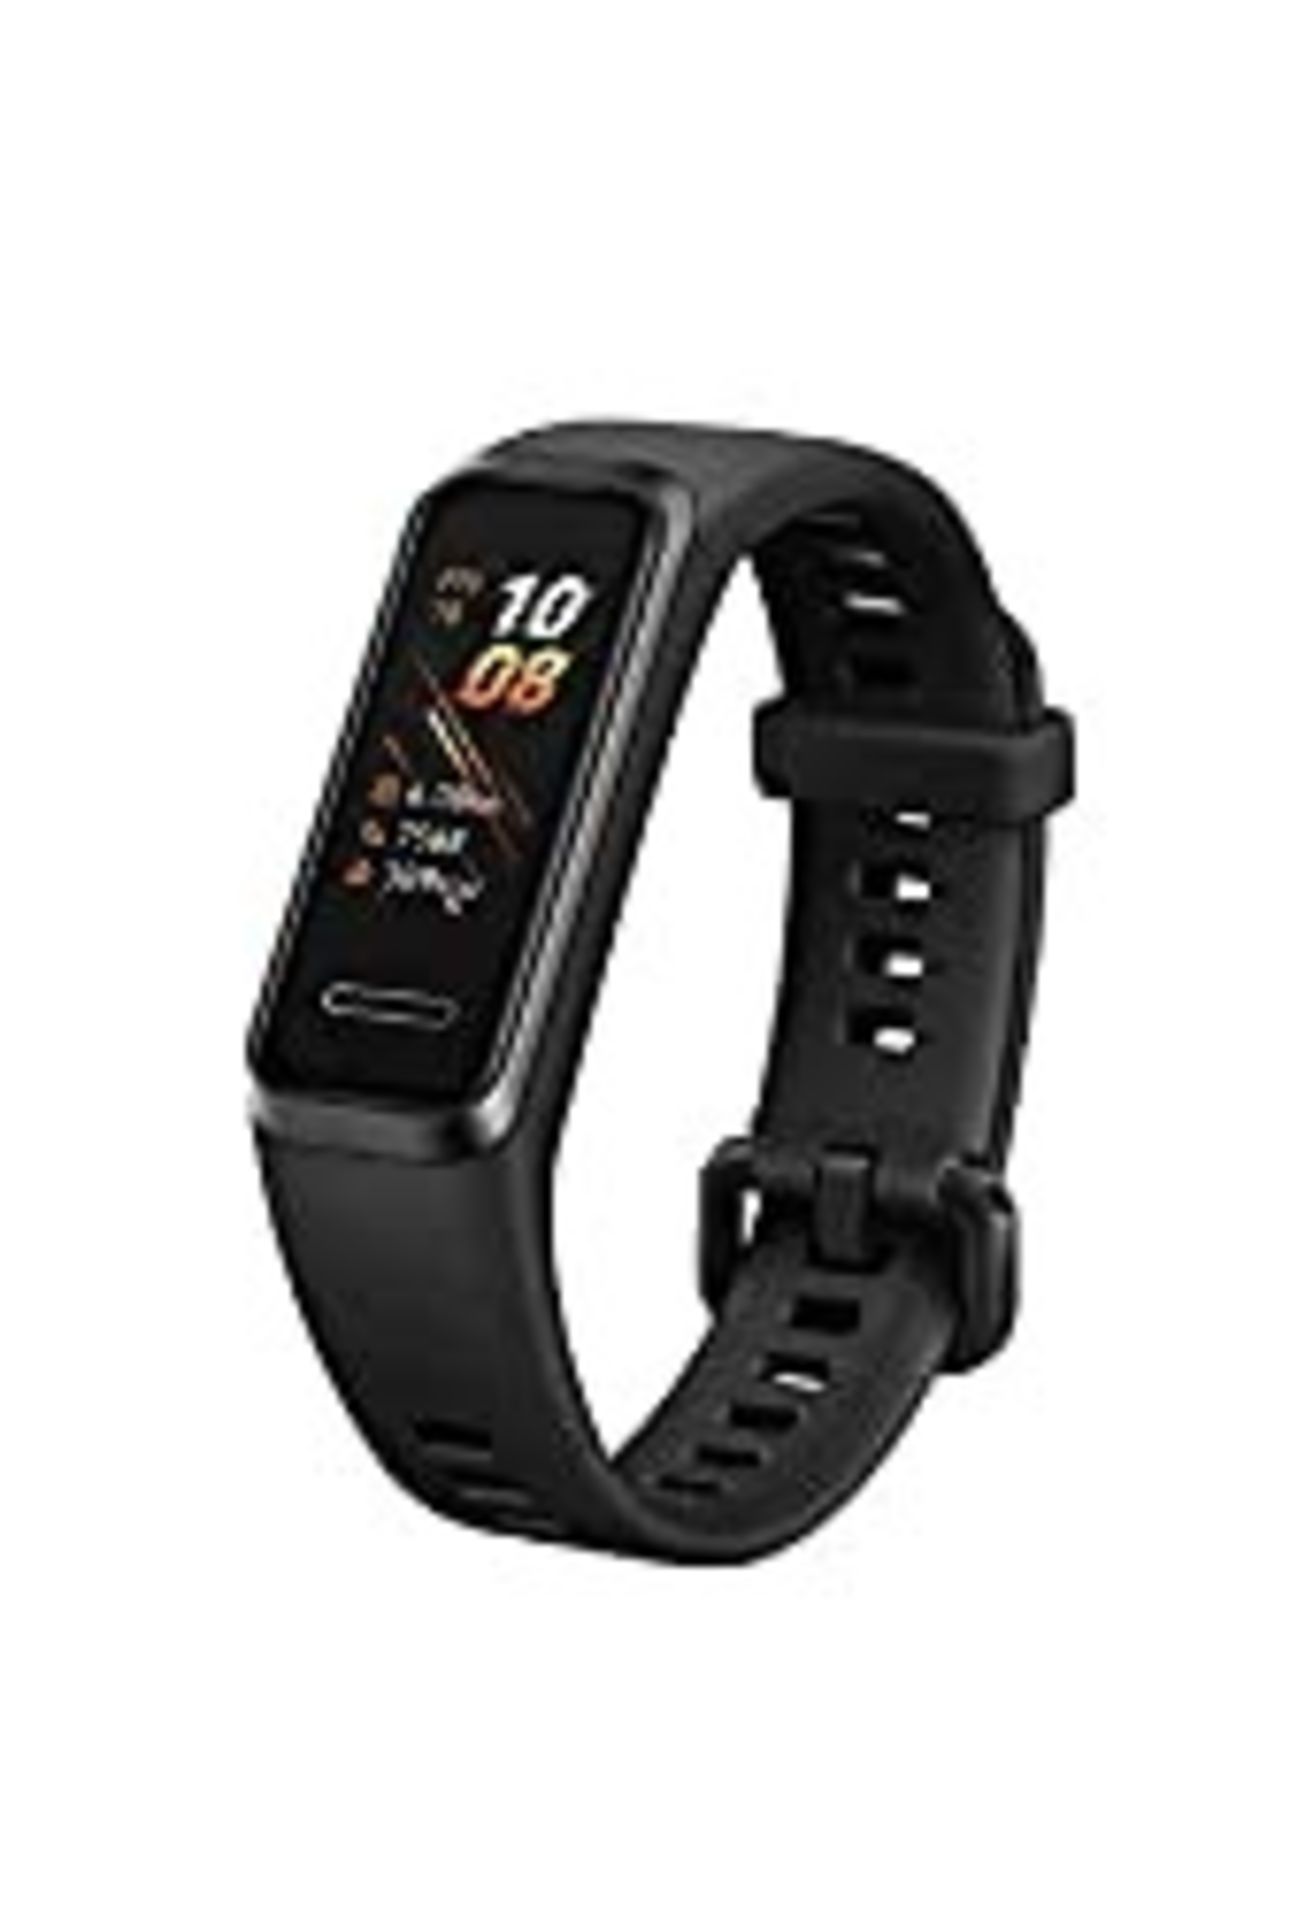 HUAWEI Band 4 Smart Band, Fitness Activities Tracker with 0.96" Color Screen, 24/7 Continuous H